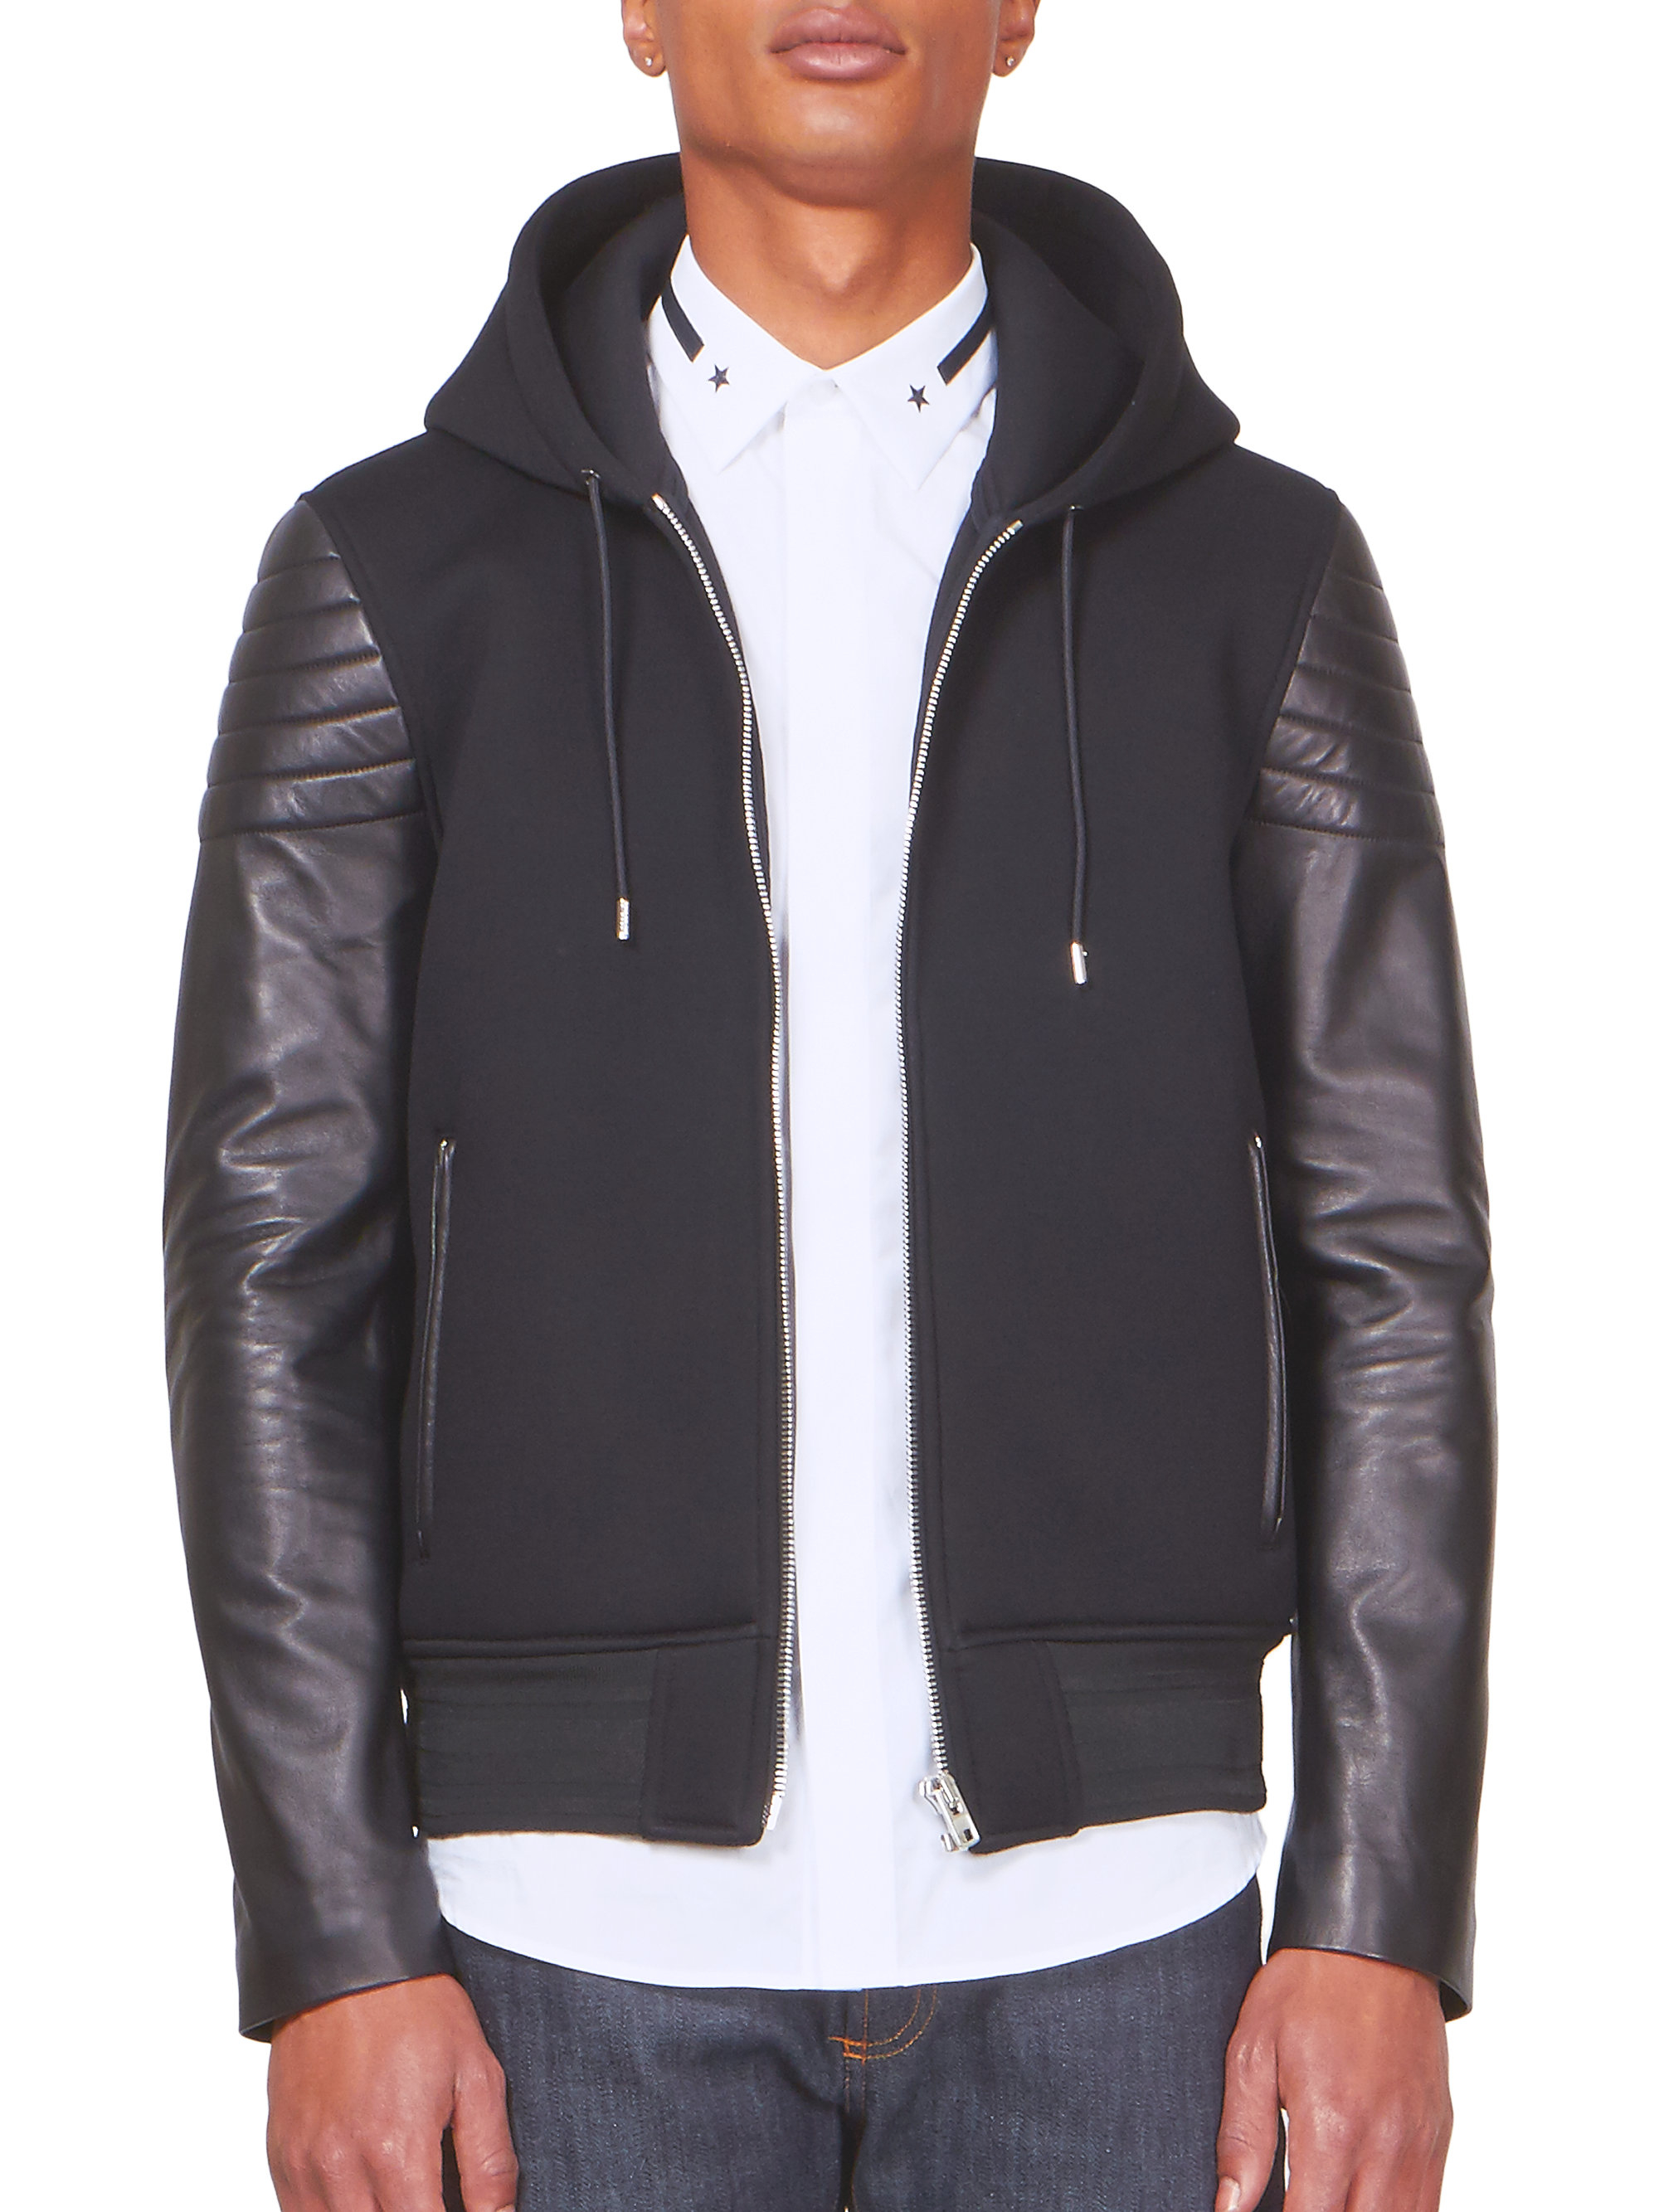 Givenchy Multimedia Leather Jacket Hoodie in Black for Men - Lyst